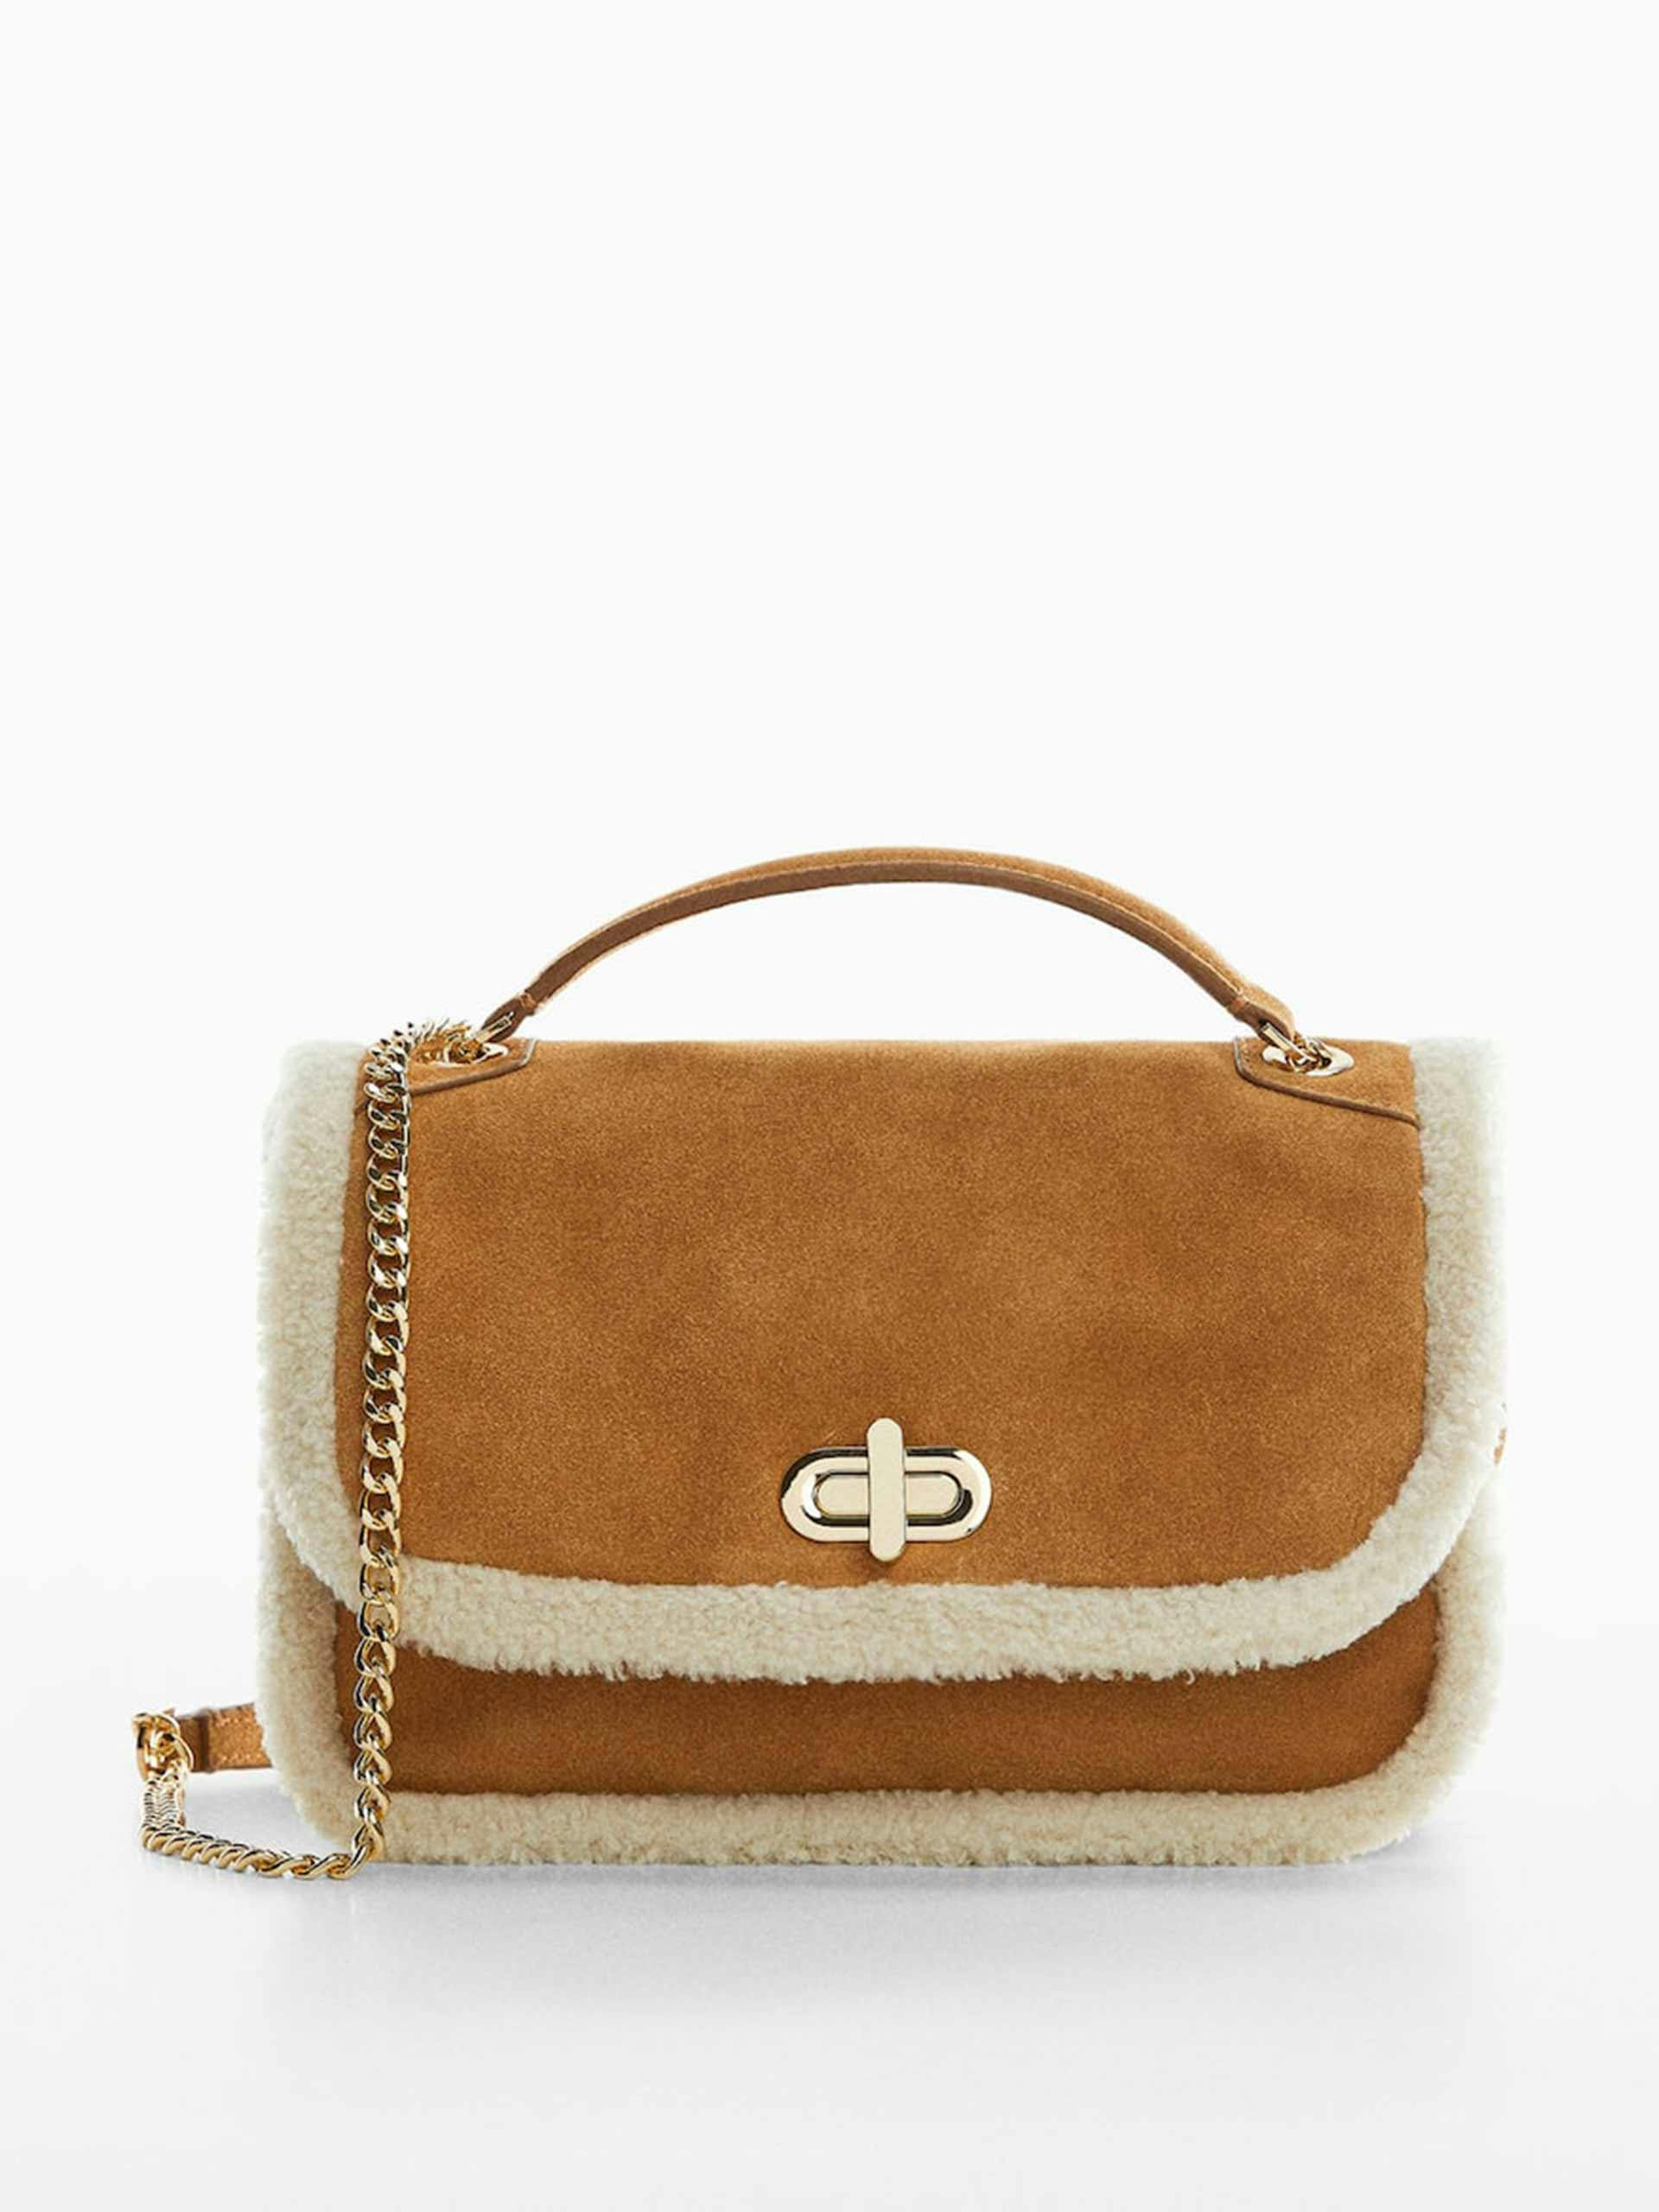 Shearling-effect leather bag